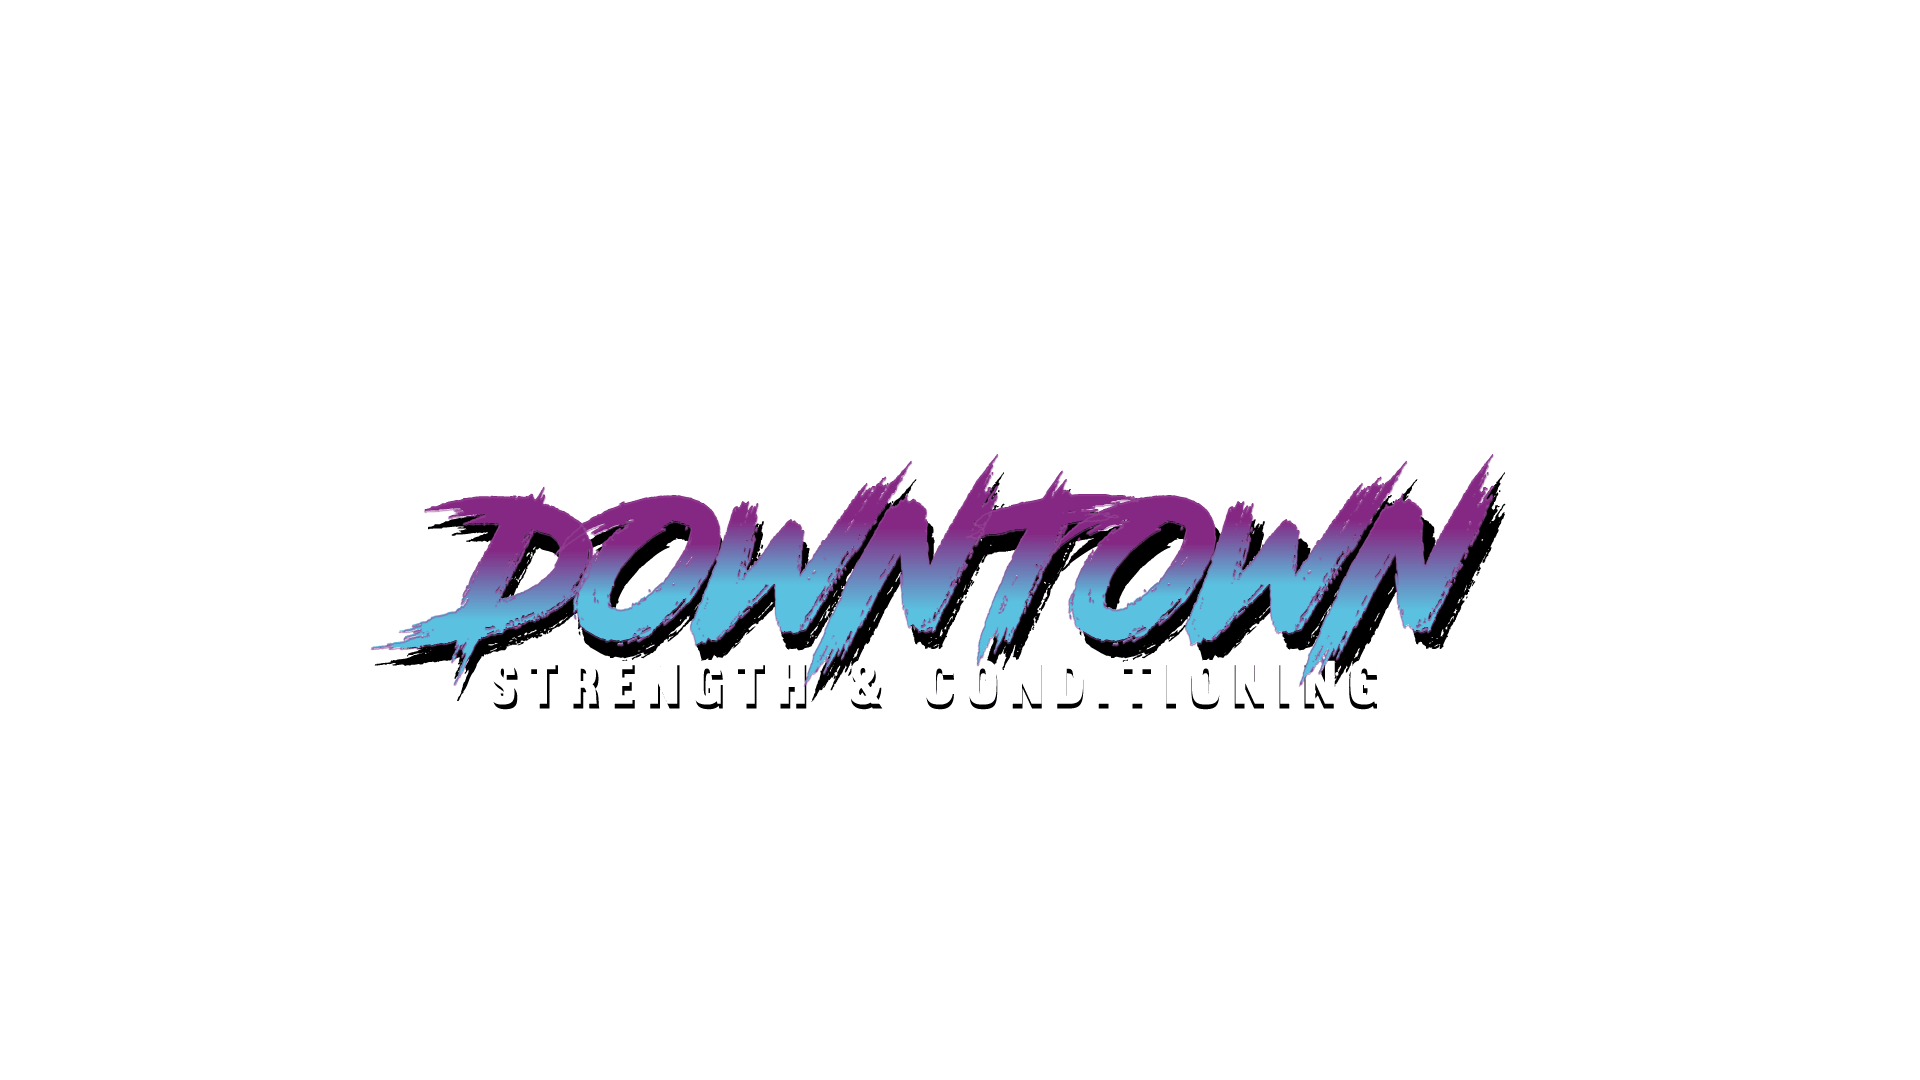 DTSC Logo - Downtown Strength and Conditioning in Downtown Miami, FL